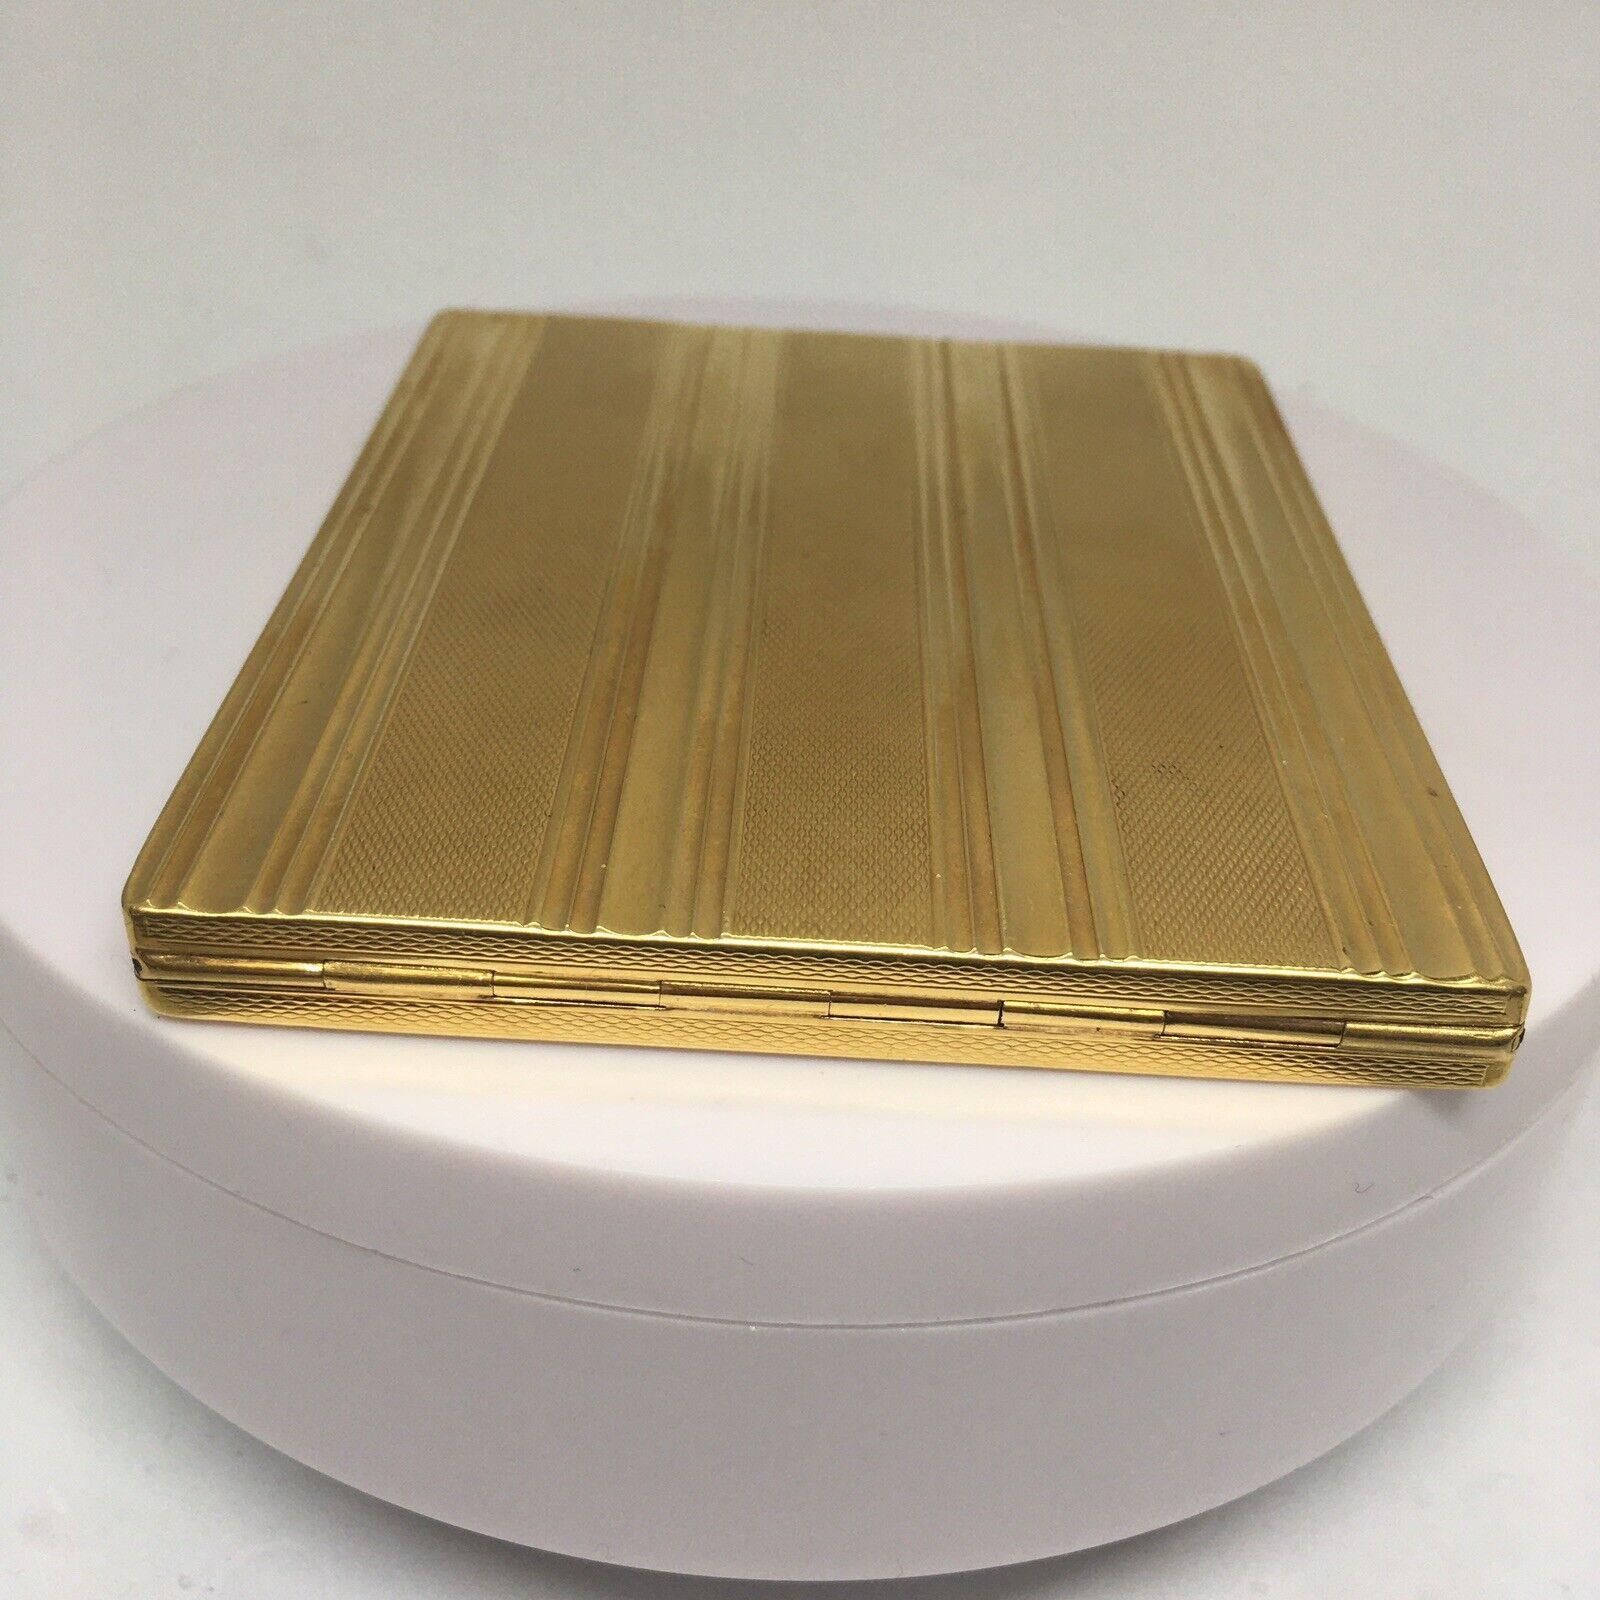 Italian Made 18K Gold 1940s Engine Turned CIGARETTE CASE Box 



161.6 gram
3.5 inch by 3 inch by 3/8 inch thick
In good condition for its age, no damage, no evidence of repairs, see pictures  